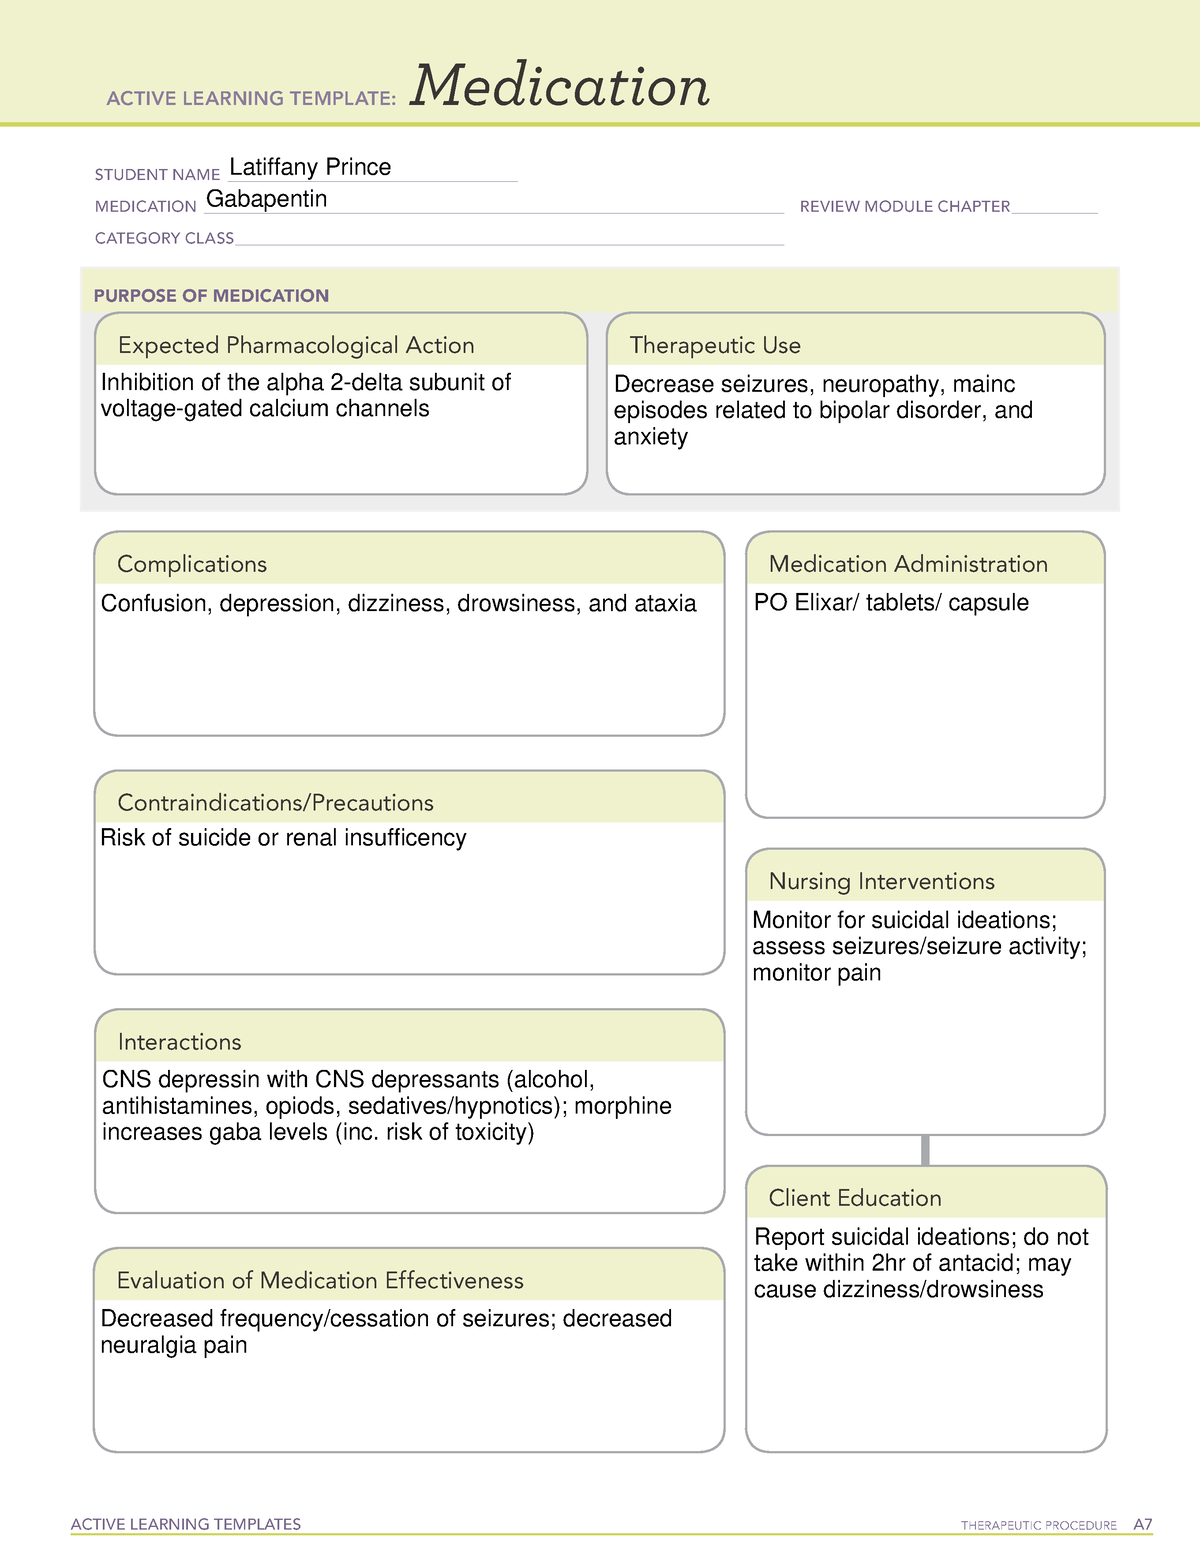 Gabapentin Med Template ACTIVE LEARNING TEMPLATES THERAPEUTIC